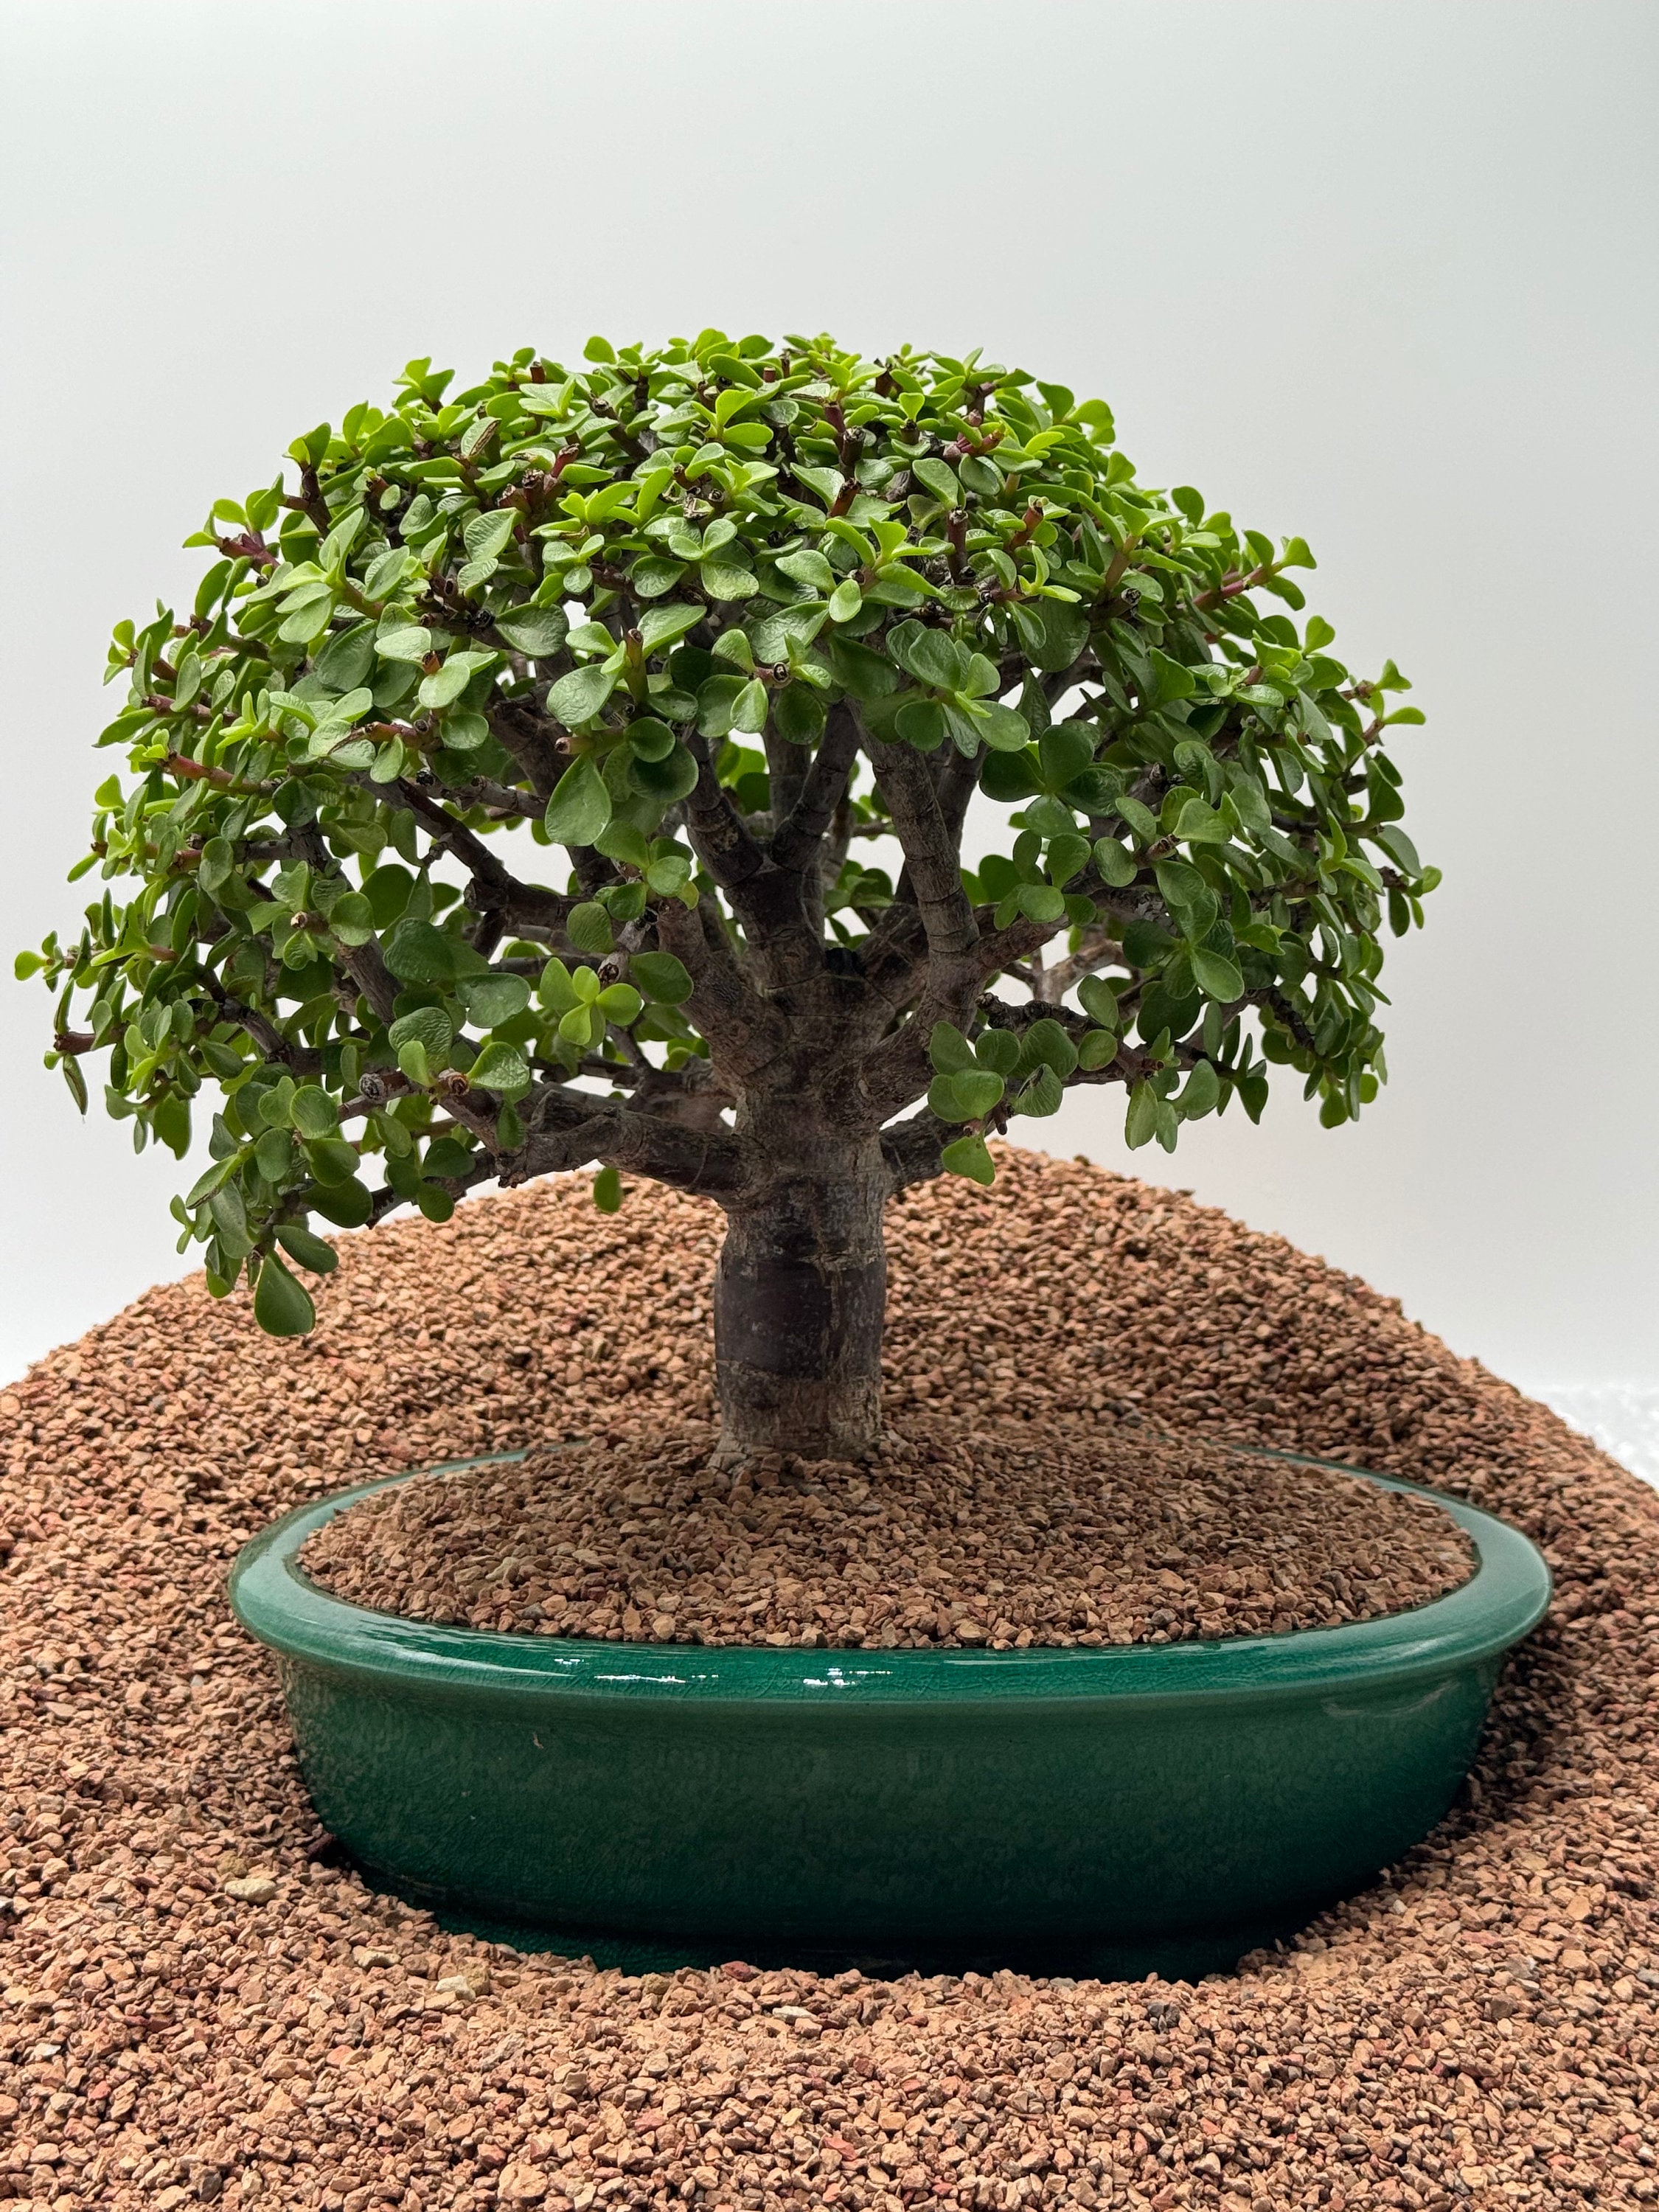 Bonsai soil, recommended substrate mixtures - Bonsai Empire